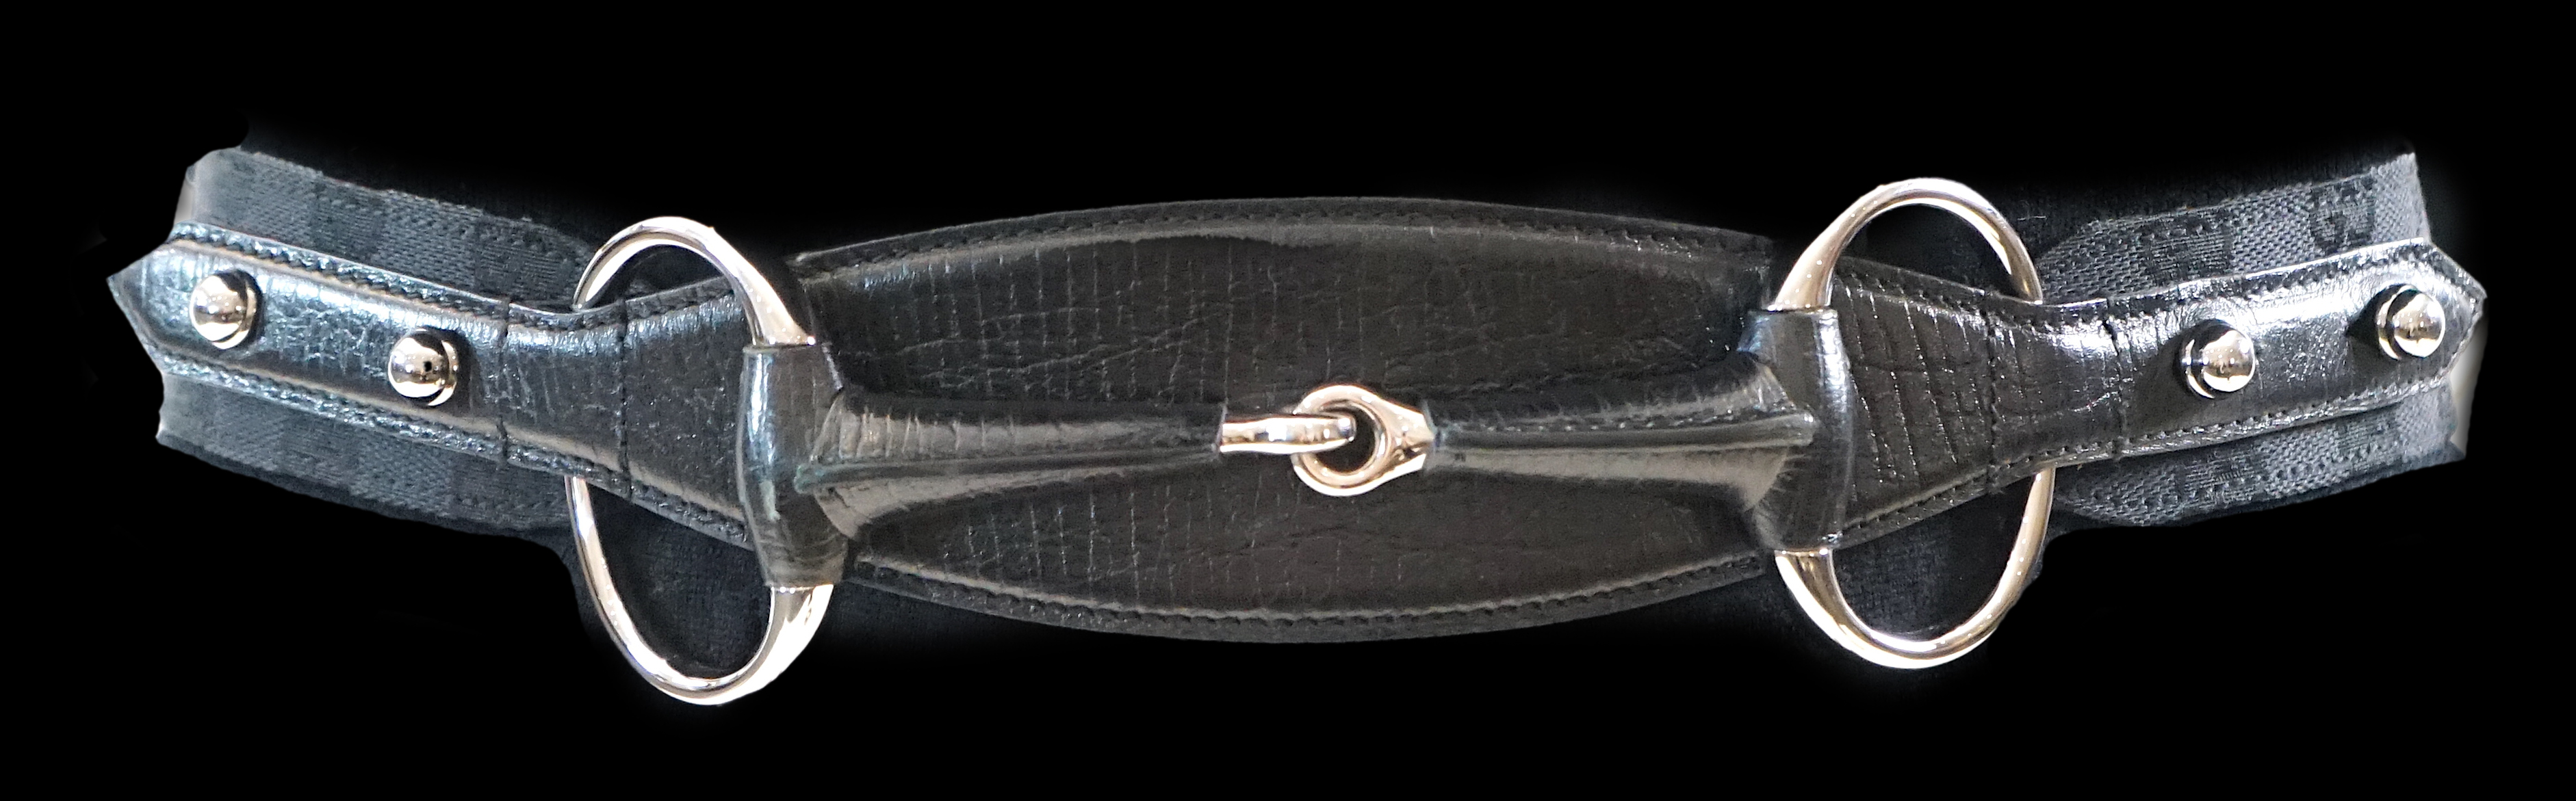 A Gucci horse bit belt in black leather and silver Size 90/36